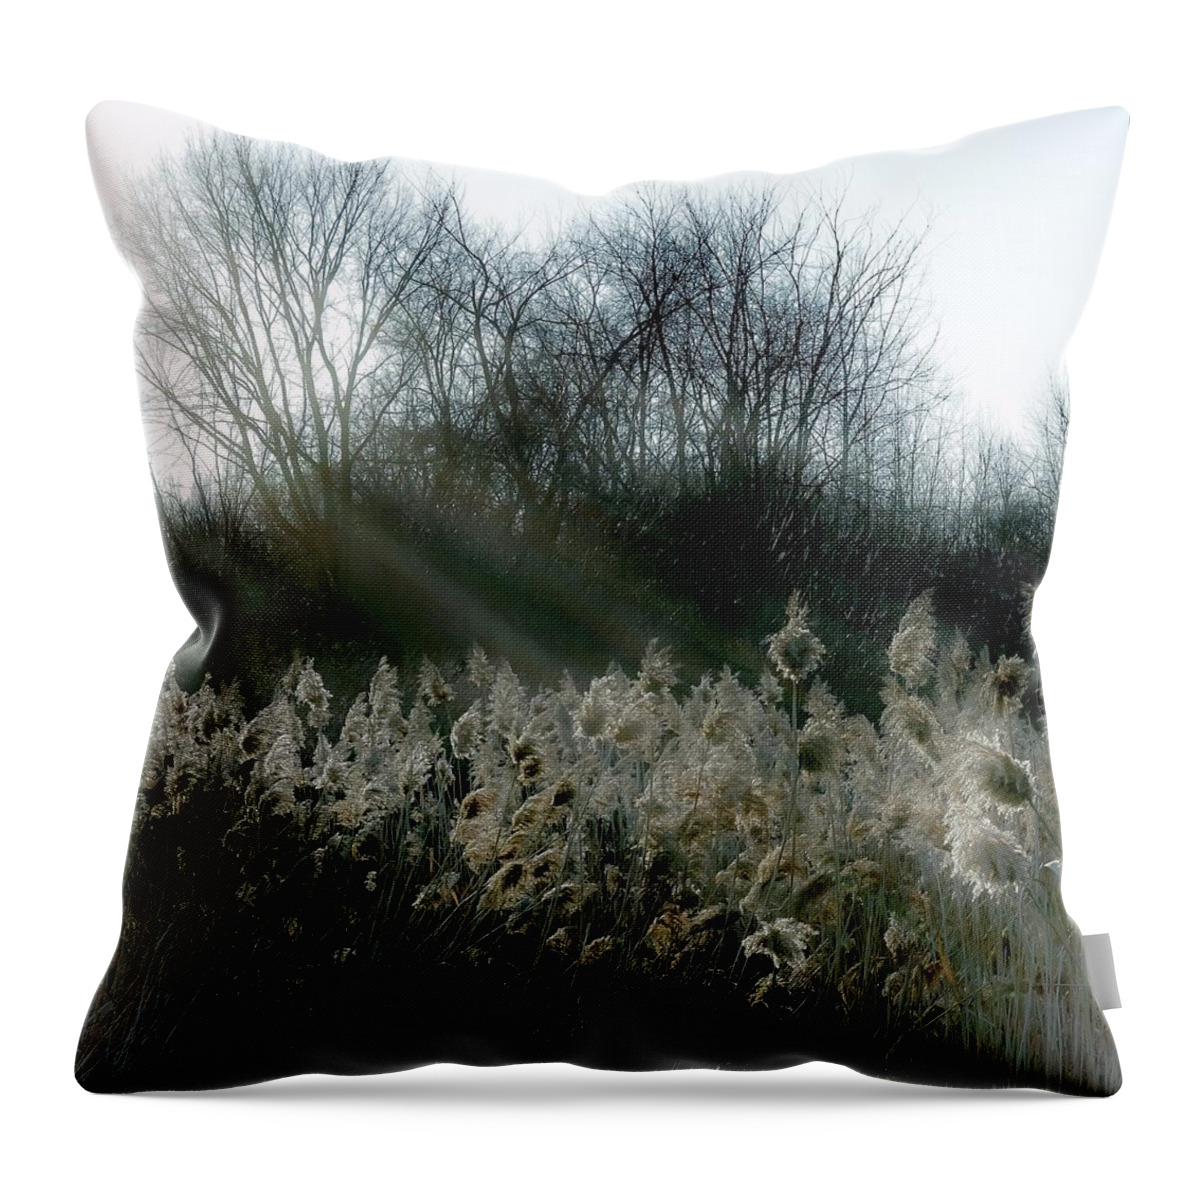  Throw Pillow featuring the photograph Winter Fringe by Kendall McKernon